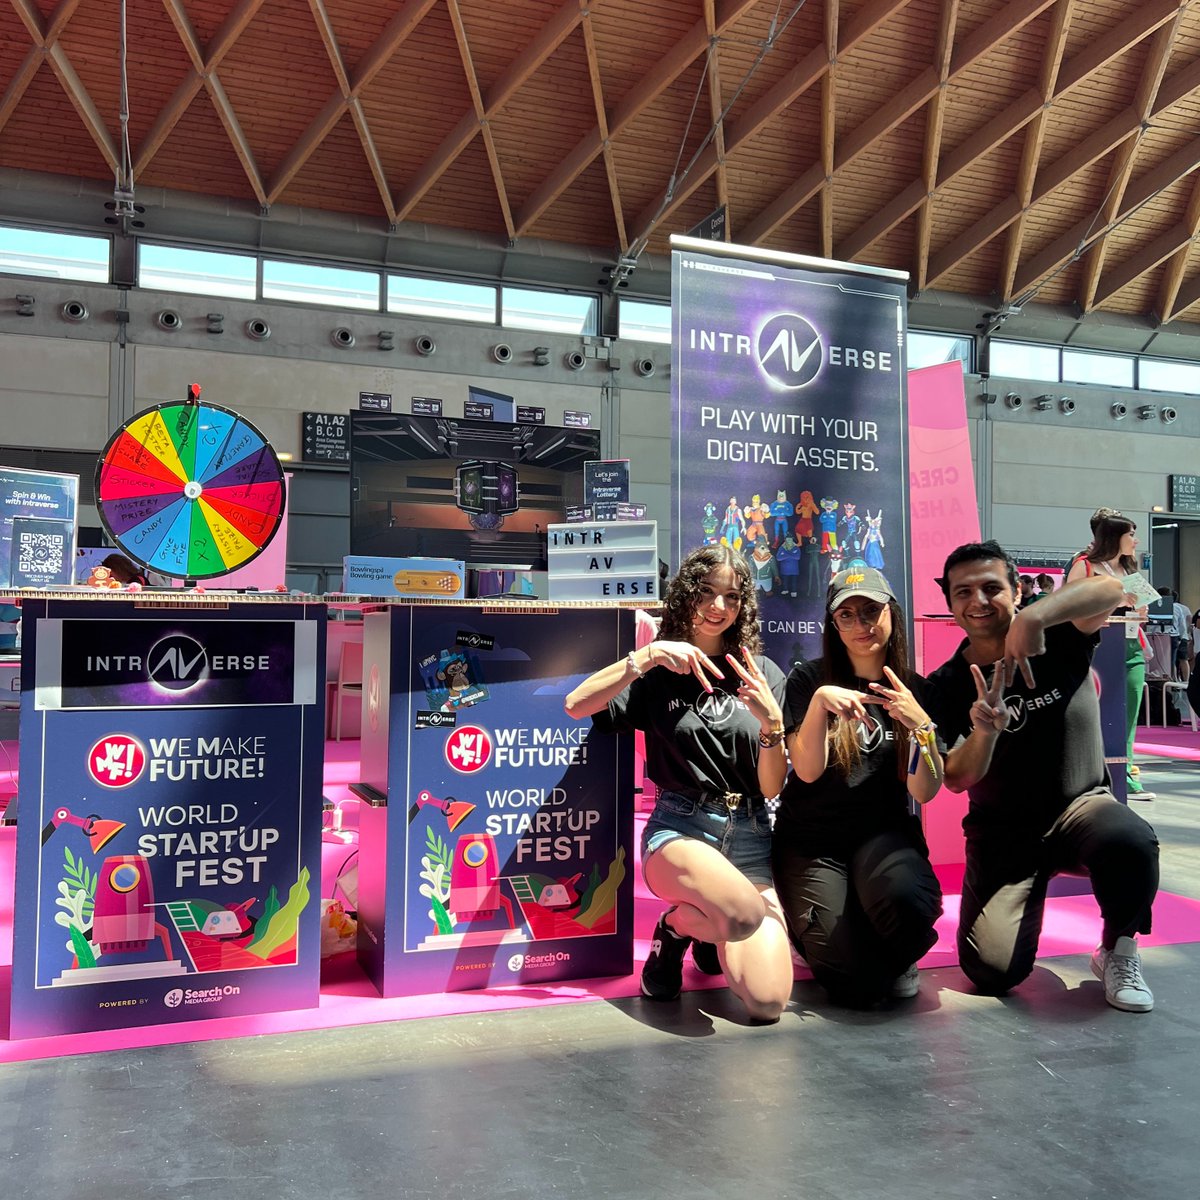 🌍Intraverse Adventures🌍
Episode 2.1: “WMF Rimini”  

A lot of fun from @WMFWeMakeFuture, join us to spin our lucky wheel, to try our gameplay and to discover our mistery prizes🎁🏆

Stay tuned for updates!💜

#WMF2023 #WeMakeFuture #NFTWC2023